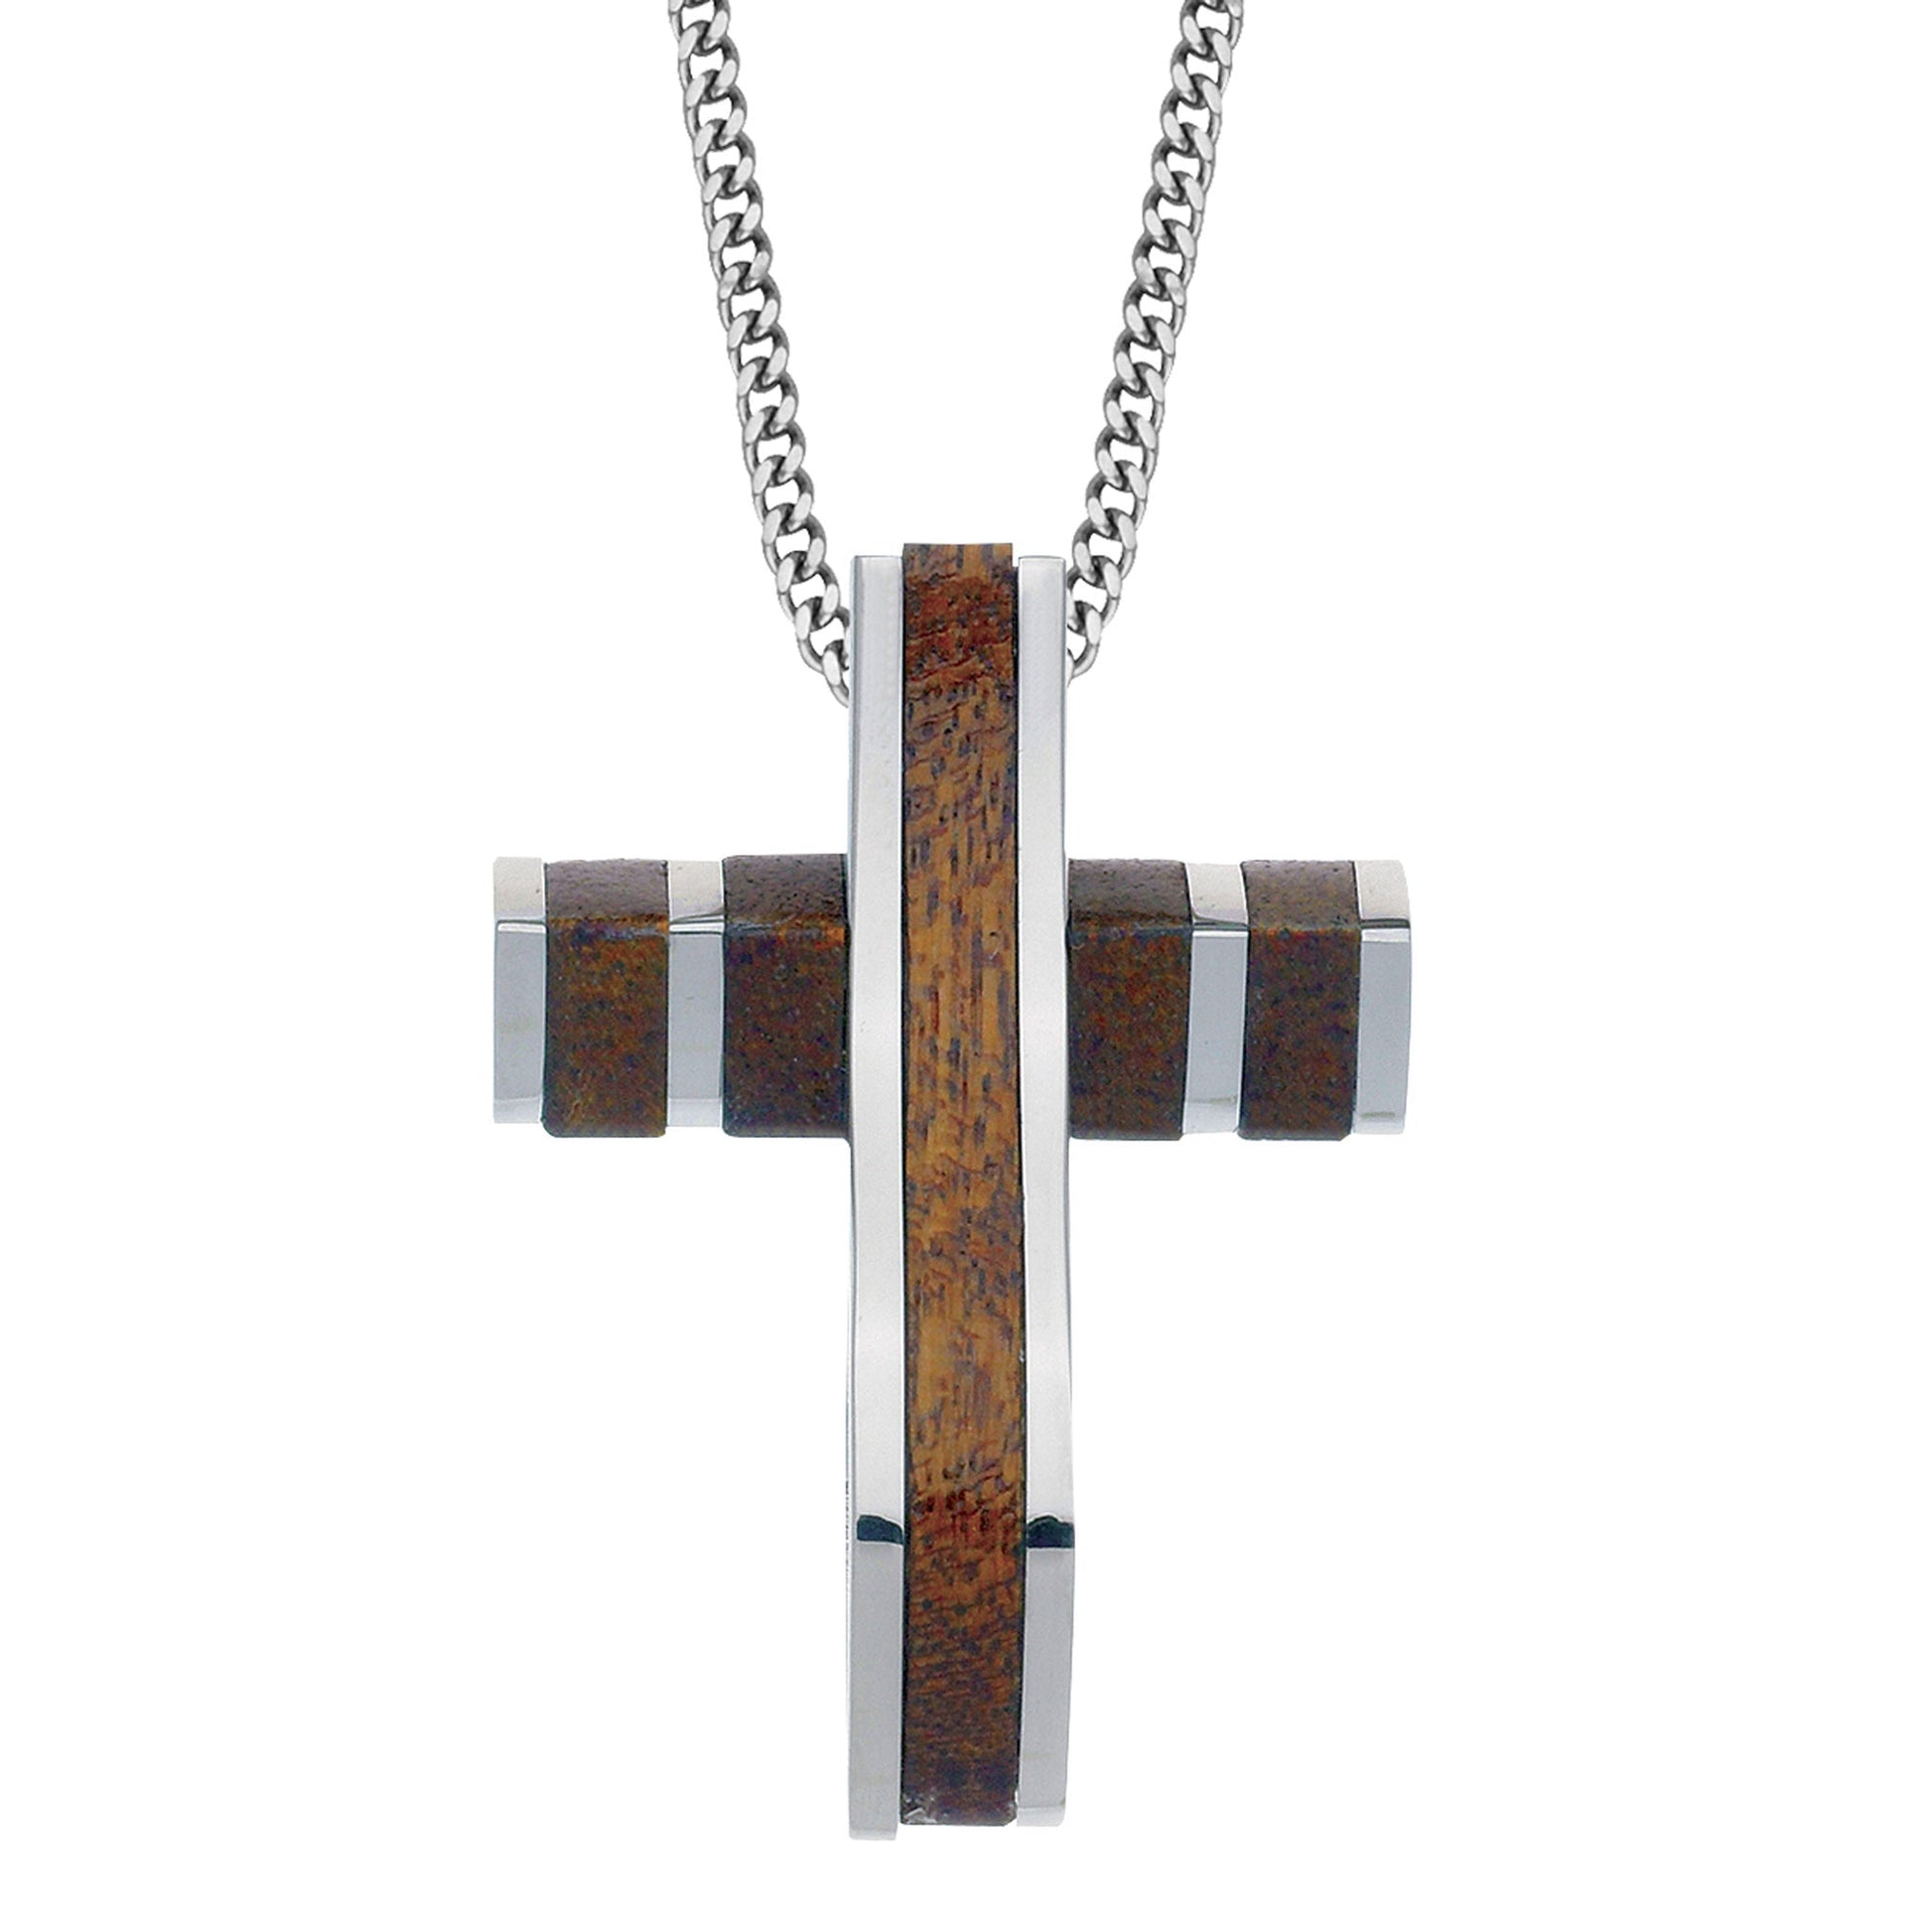 A wood & stainless steel cross necklace on 24" chain displayed on a neutral white background.